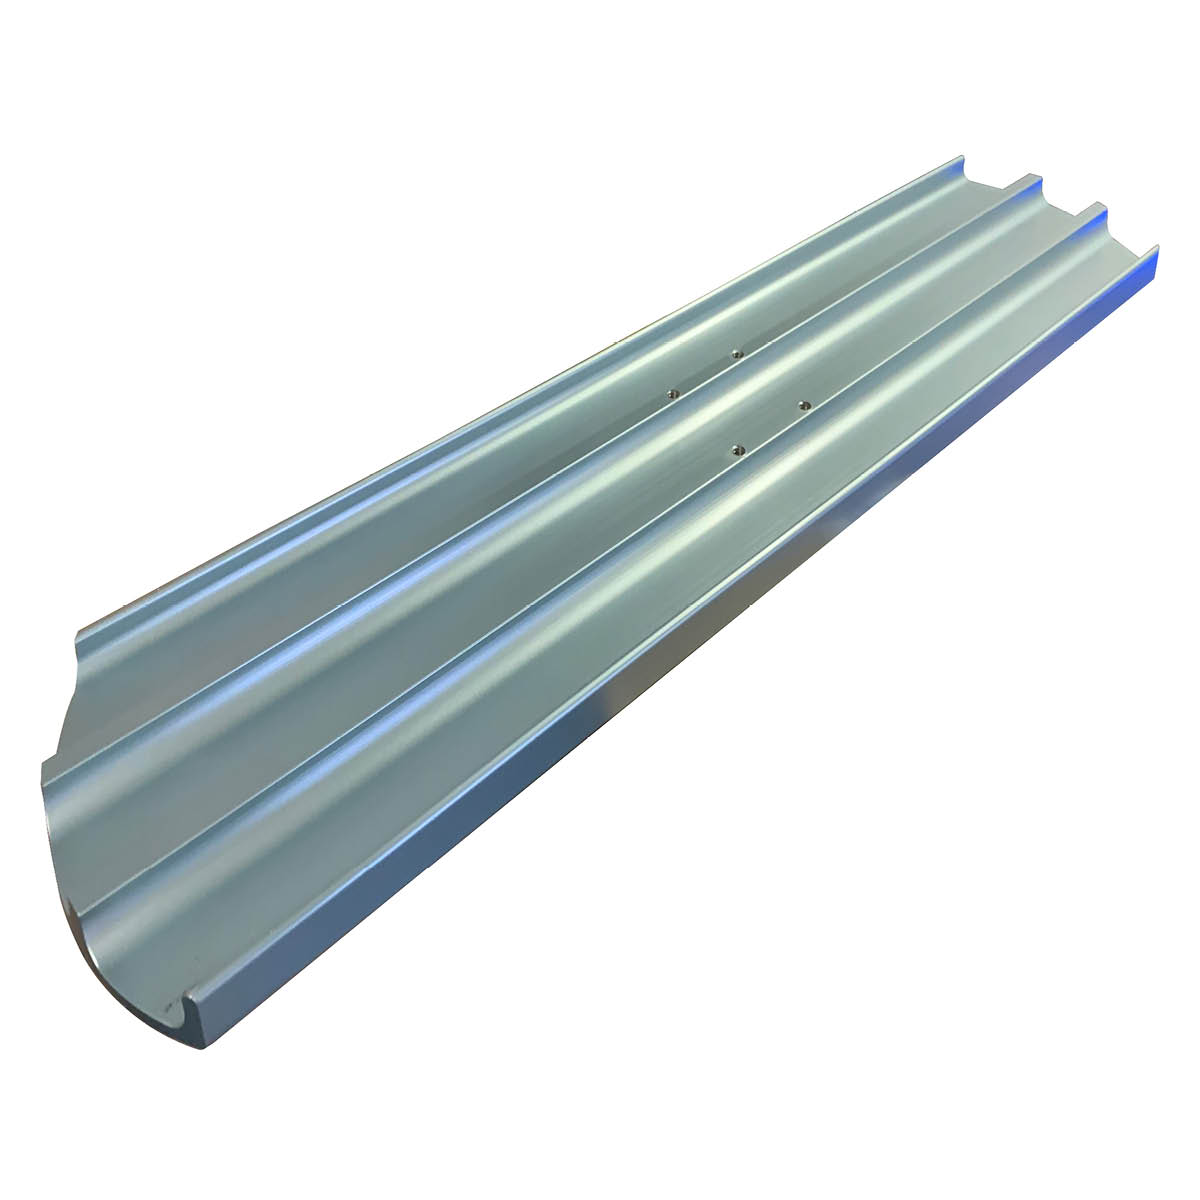 Magnesium Bullfloat Round Ended Blade 3ft. This float will finish concrete to a smooth level surface. Available from Speedcrete, United Kingdom.